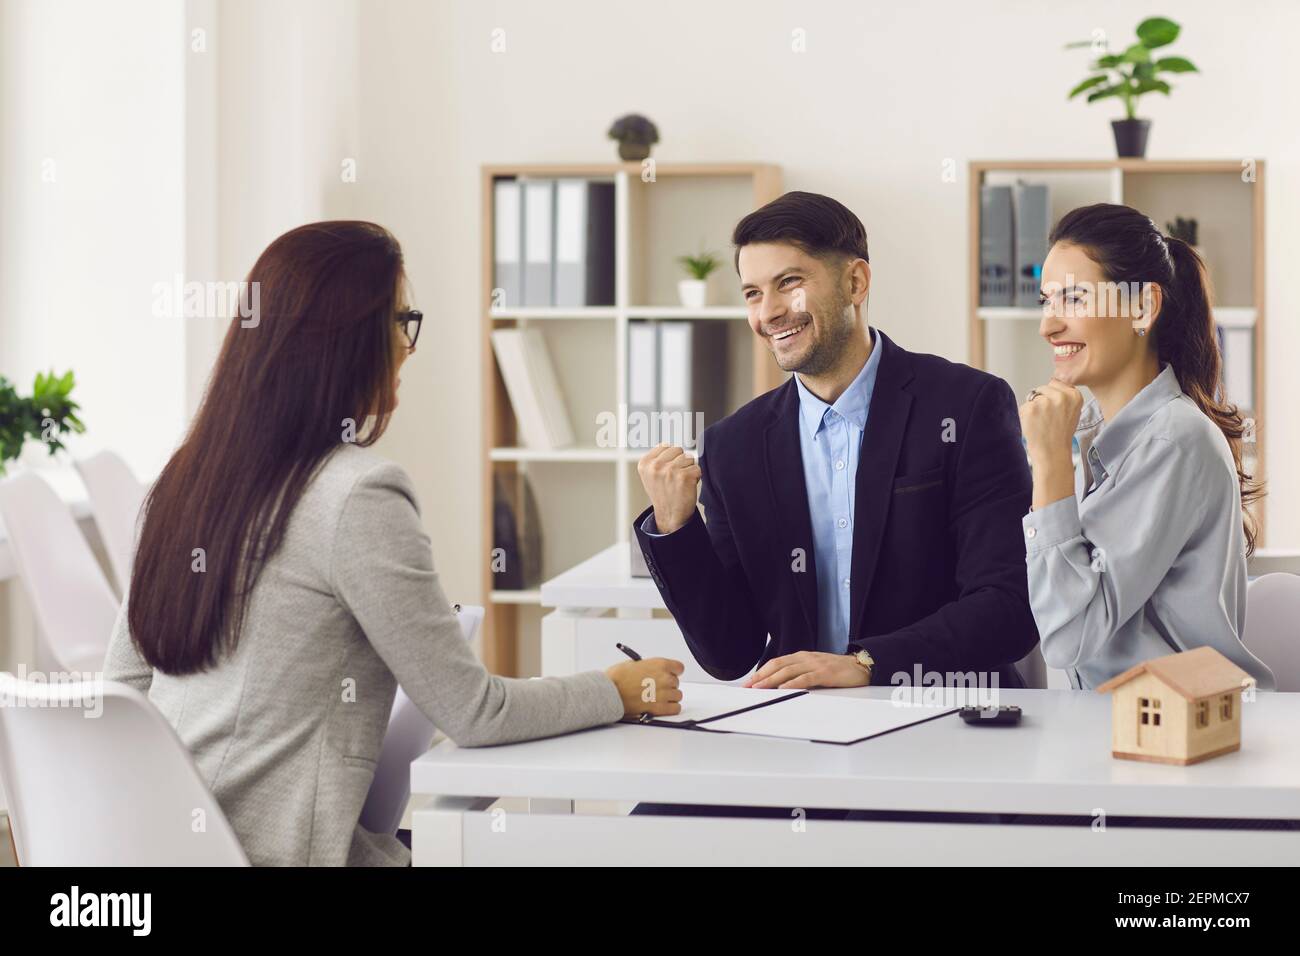 Young family happily clenching their fists at buying a house or getting mortgage approval. Stock Photo